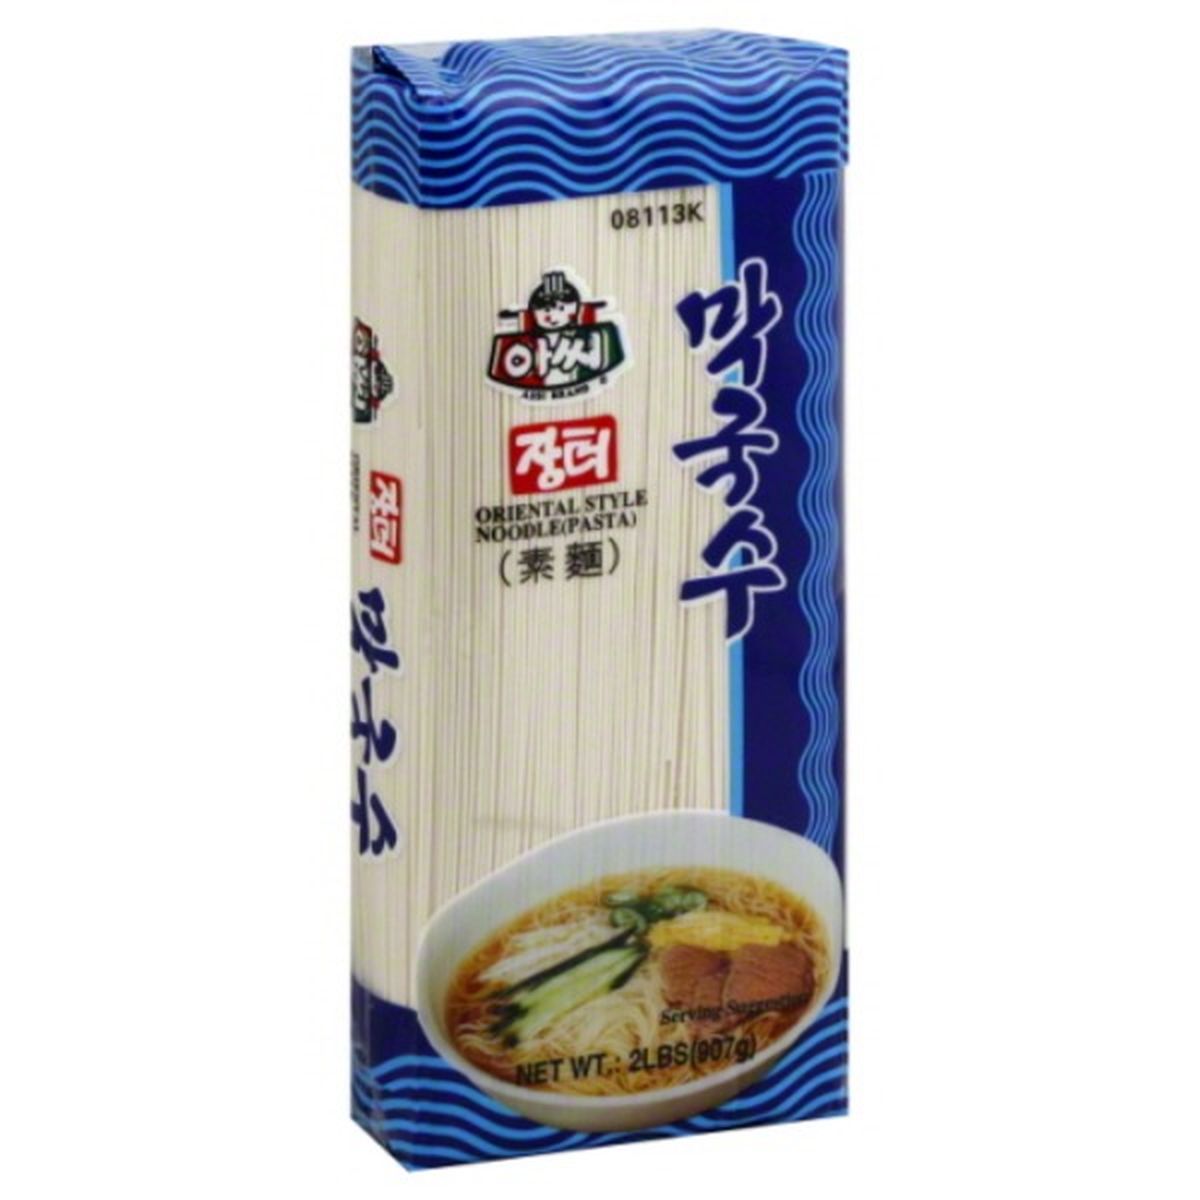 Calories in Assi Pasta, Oriental Style Noodle